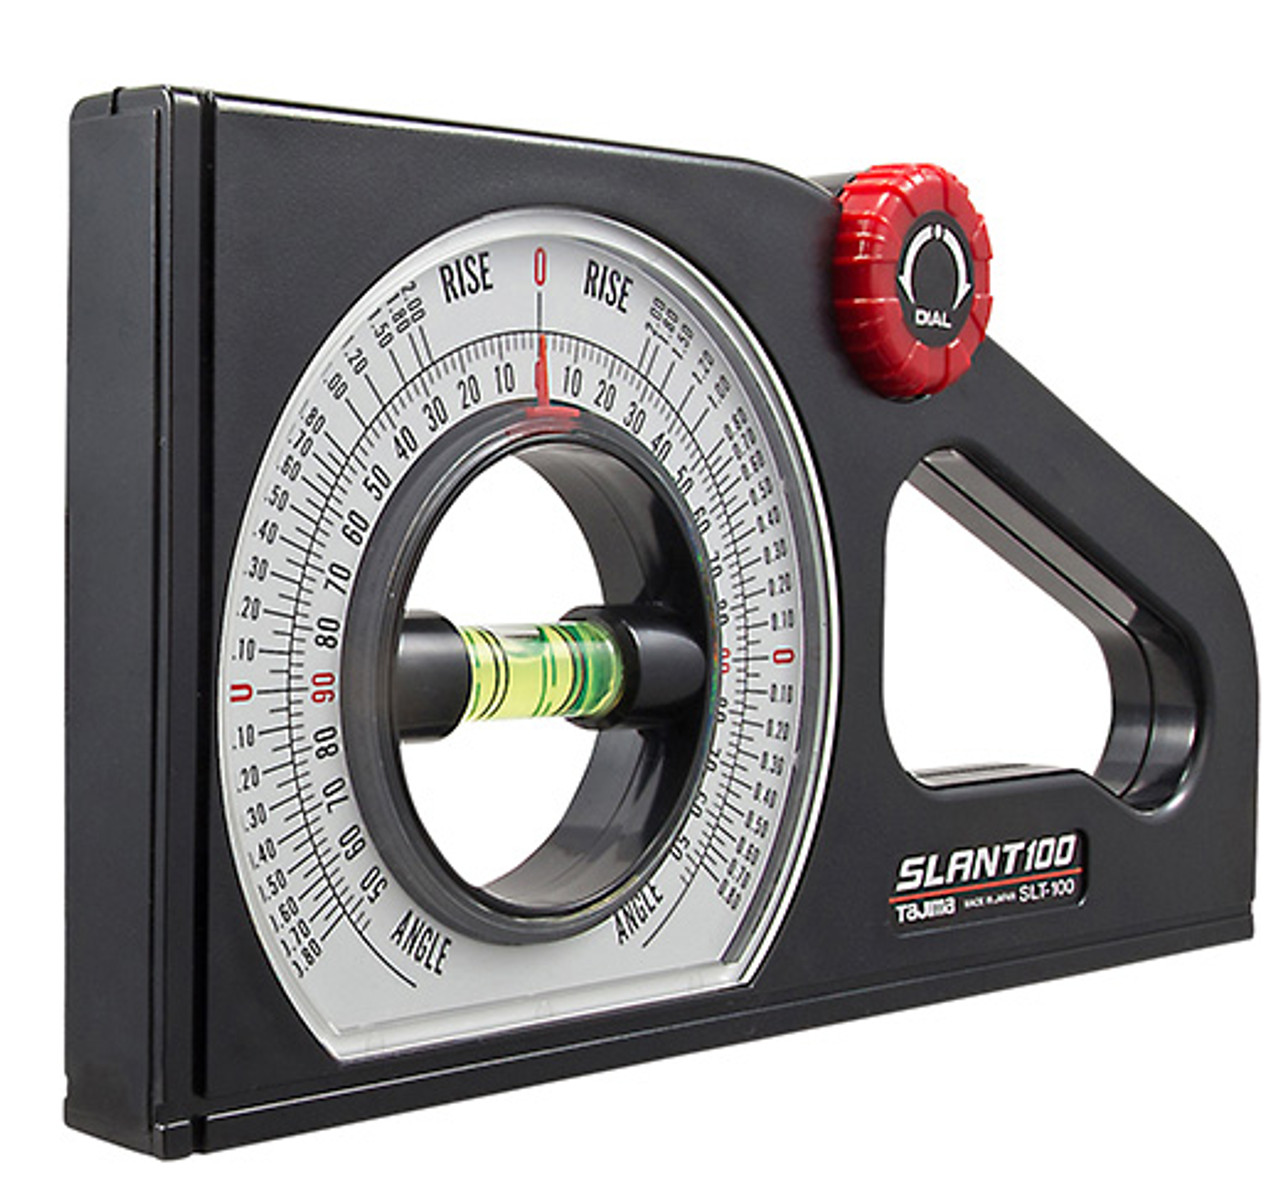 TAJIMA SLANT Angle Meter - Dual-Scale Rotary Pitch Finder with Thumb Dial & Easy-Read Vial - SLT-100